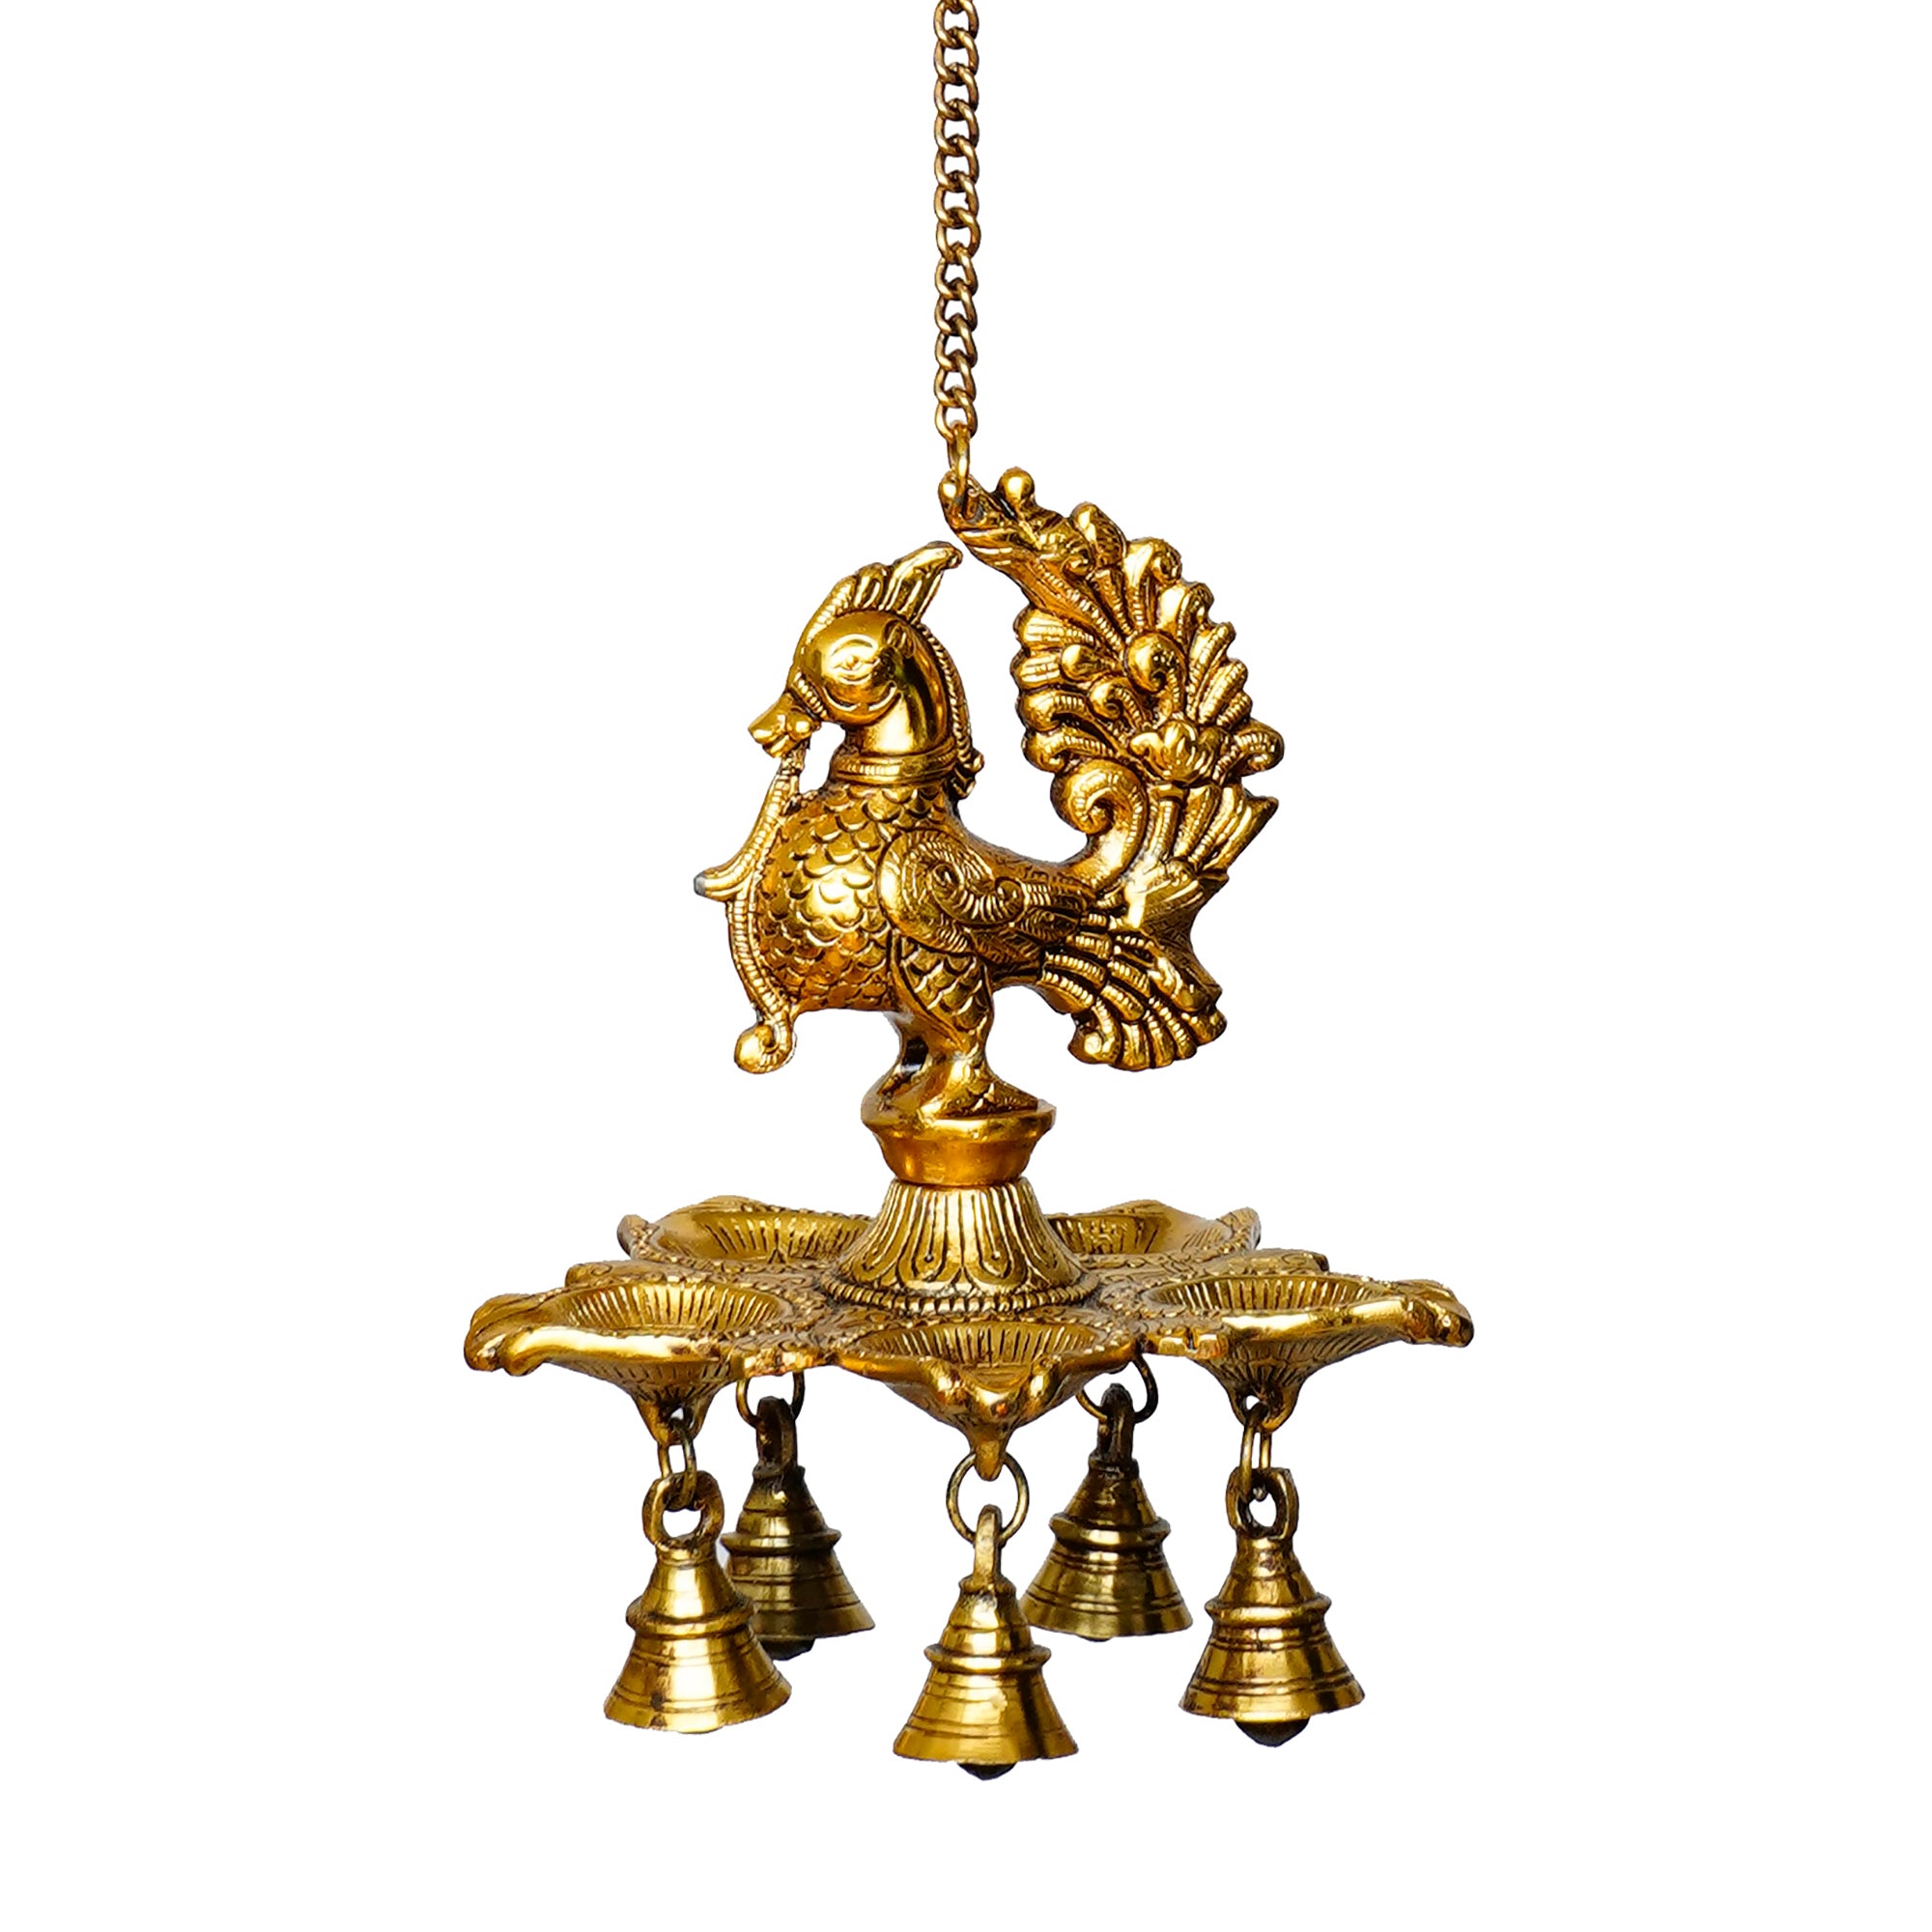 Five Wicks Decorative Peacock Diya With Bell Metal Wall Hanging With Chain 2